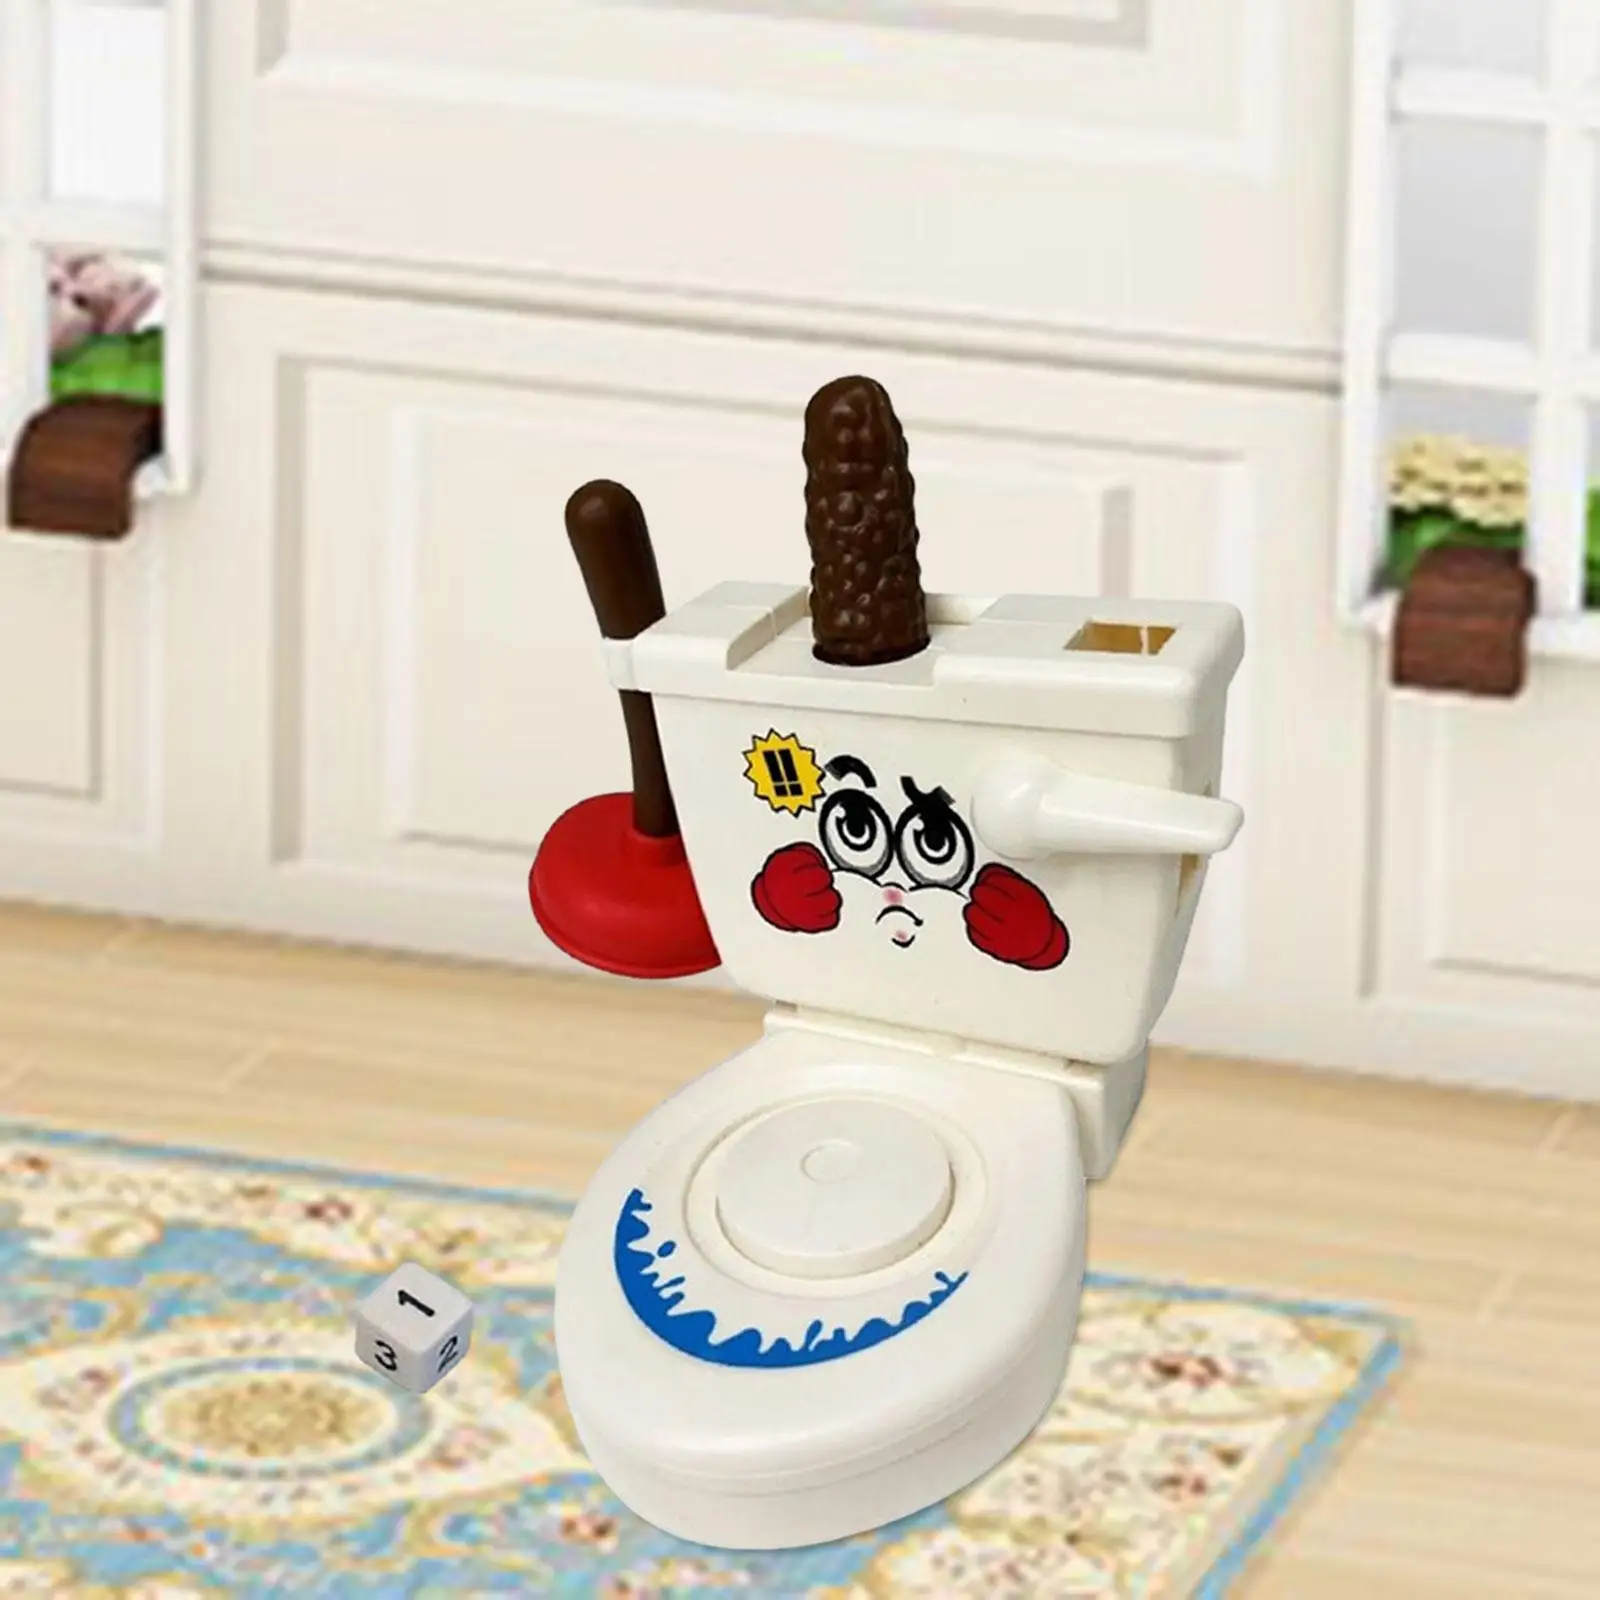 Stool Toilet Toy Party Funny Popping Out Toilet Game Toy Toilet Poop Toys for Girls Boys Todders Kid Children Birthday Gift